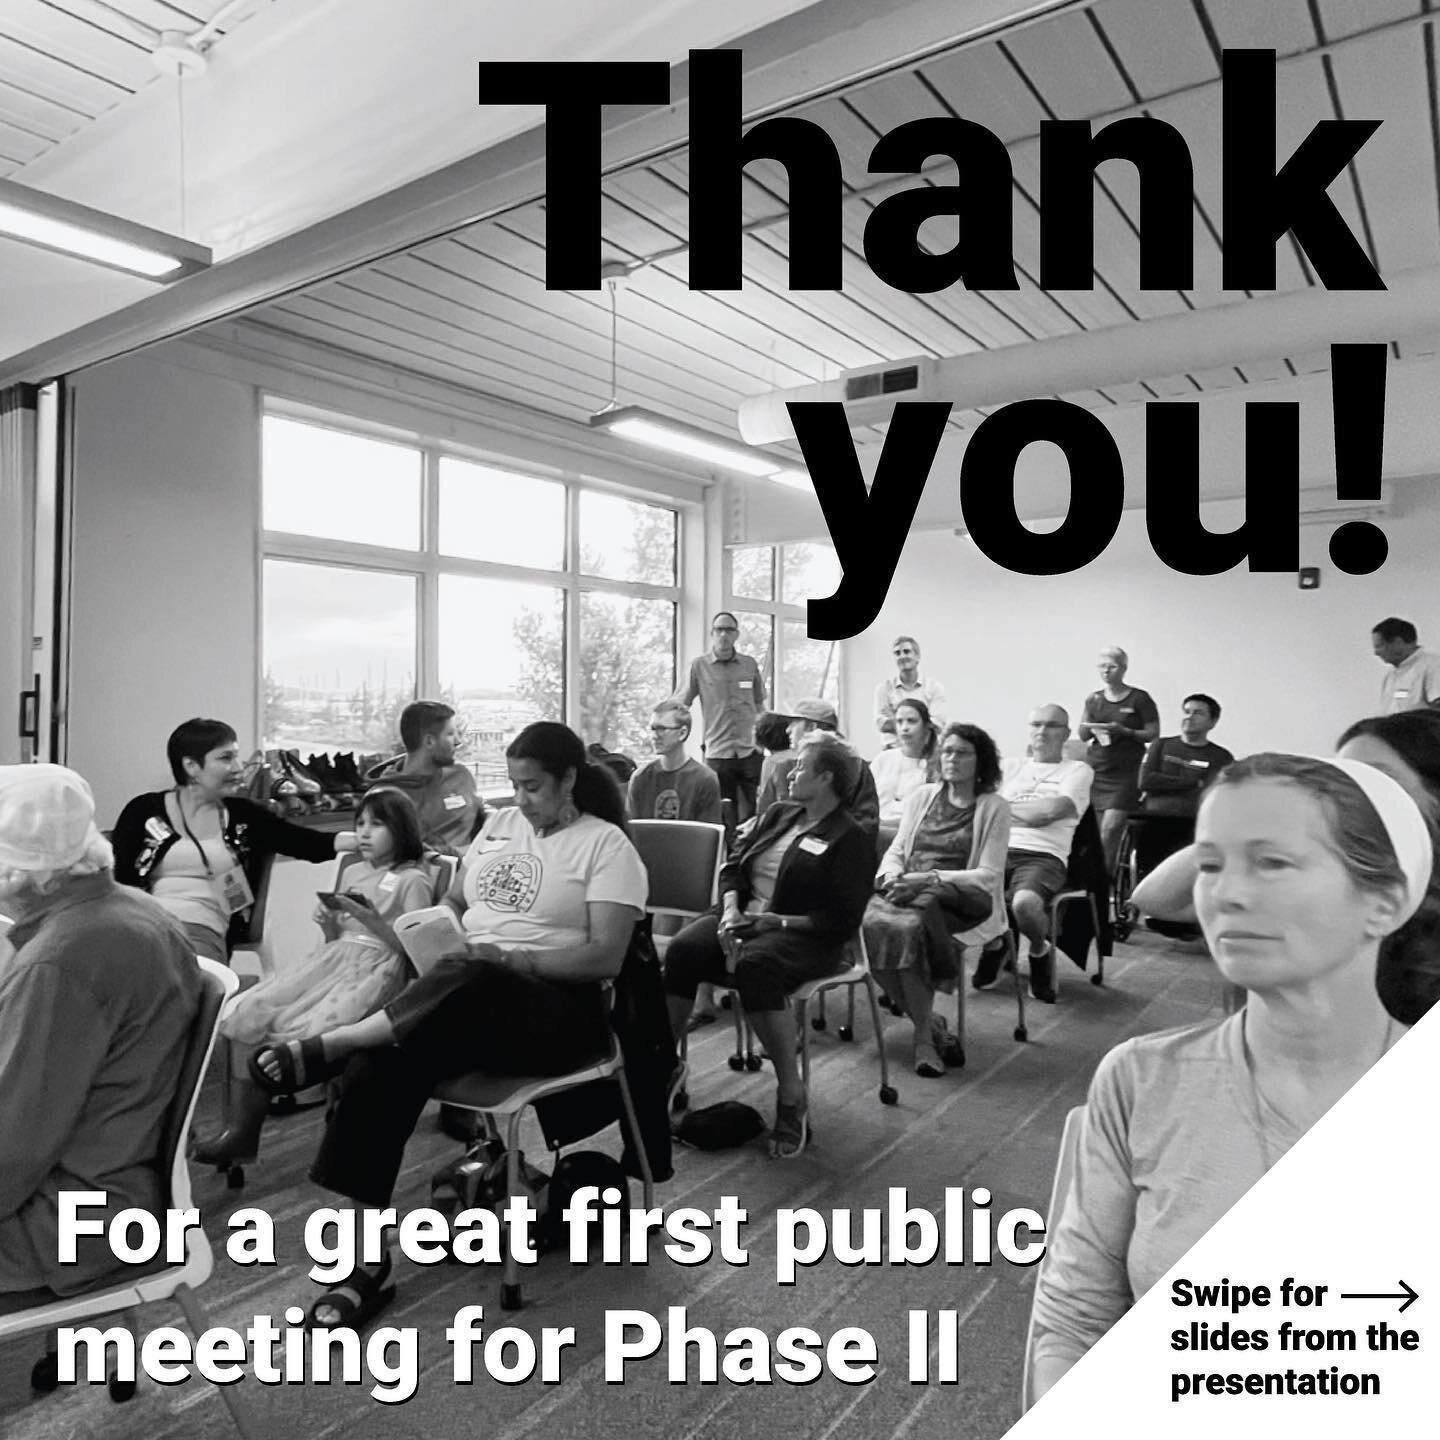 Thank you so much to everyone who participated in the first public meeting for Phase II of The FRAME! We had a full house of folks with great ideas and wonderful energy. Not only that &mdash; we received OVER 400 RESPONSES to our online and post card